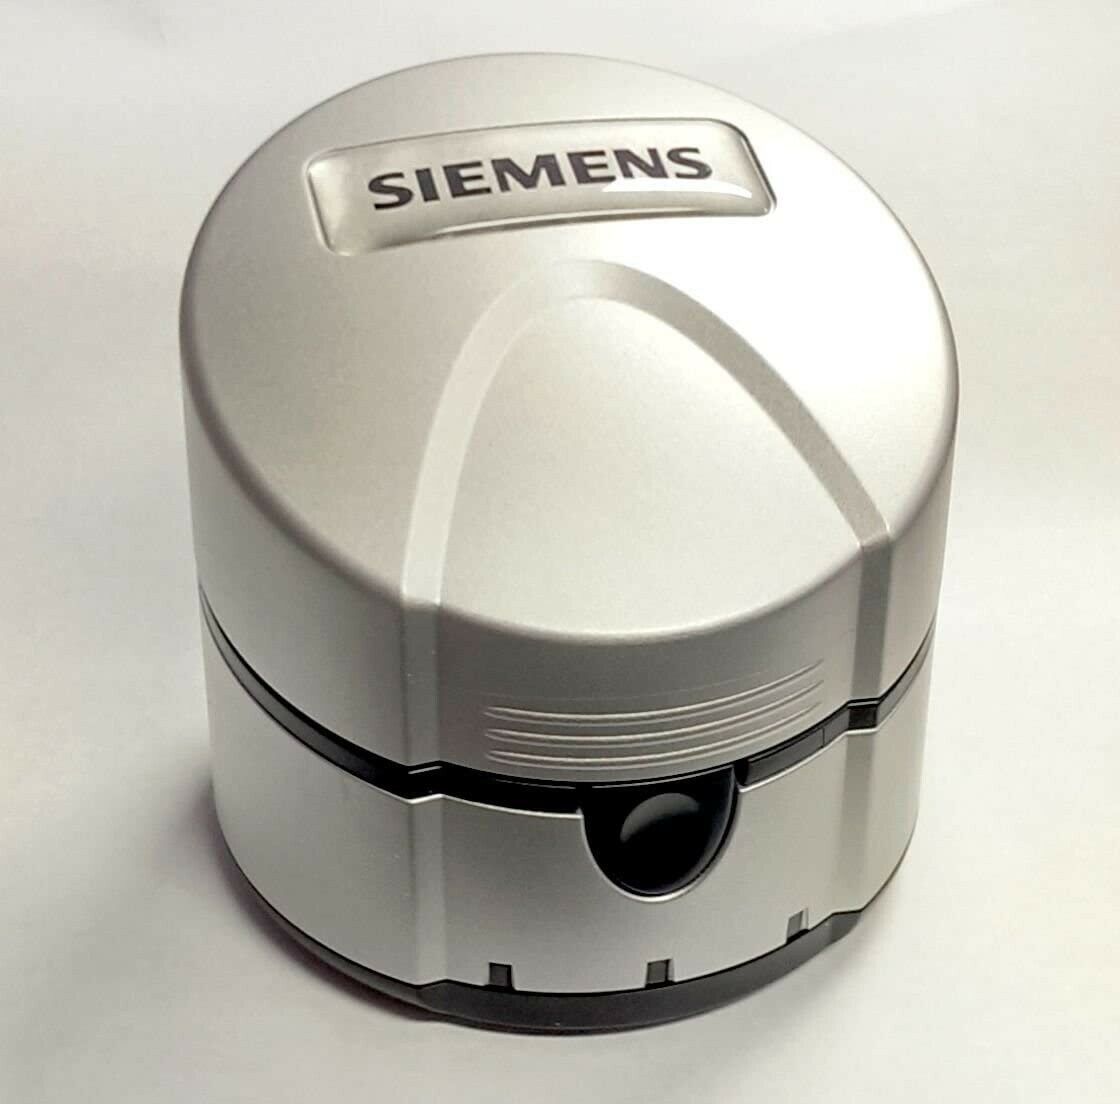 Siemens Hearing OFFicial site Aids eCharger Model 13-N Charger Type: Max 40% OFF 3G-04